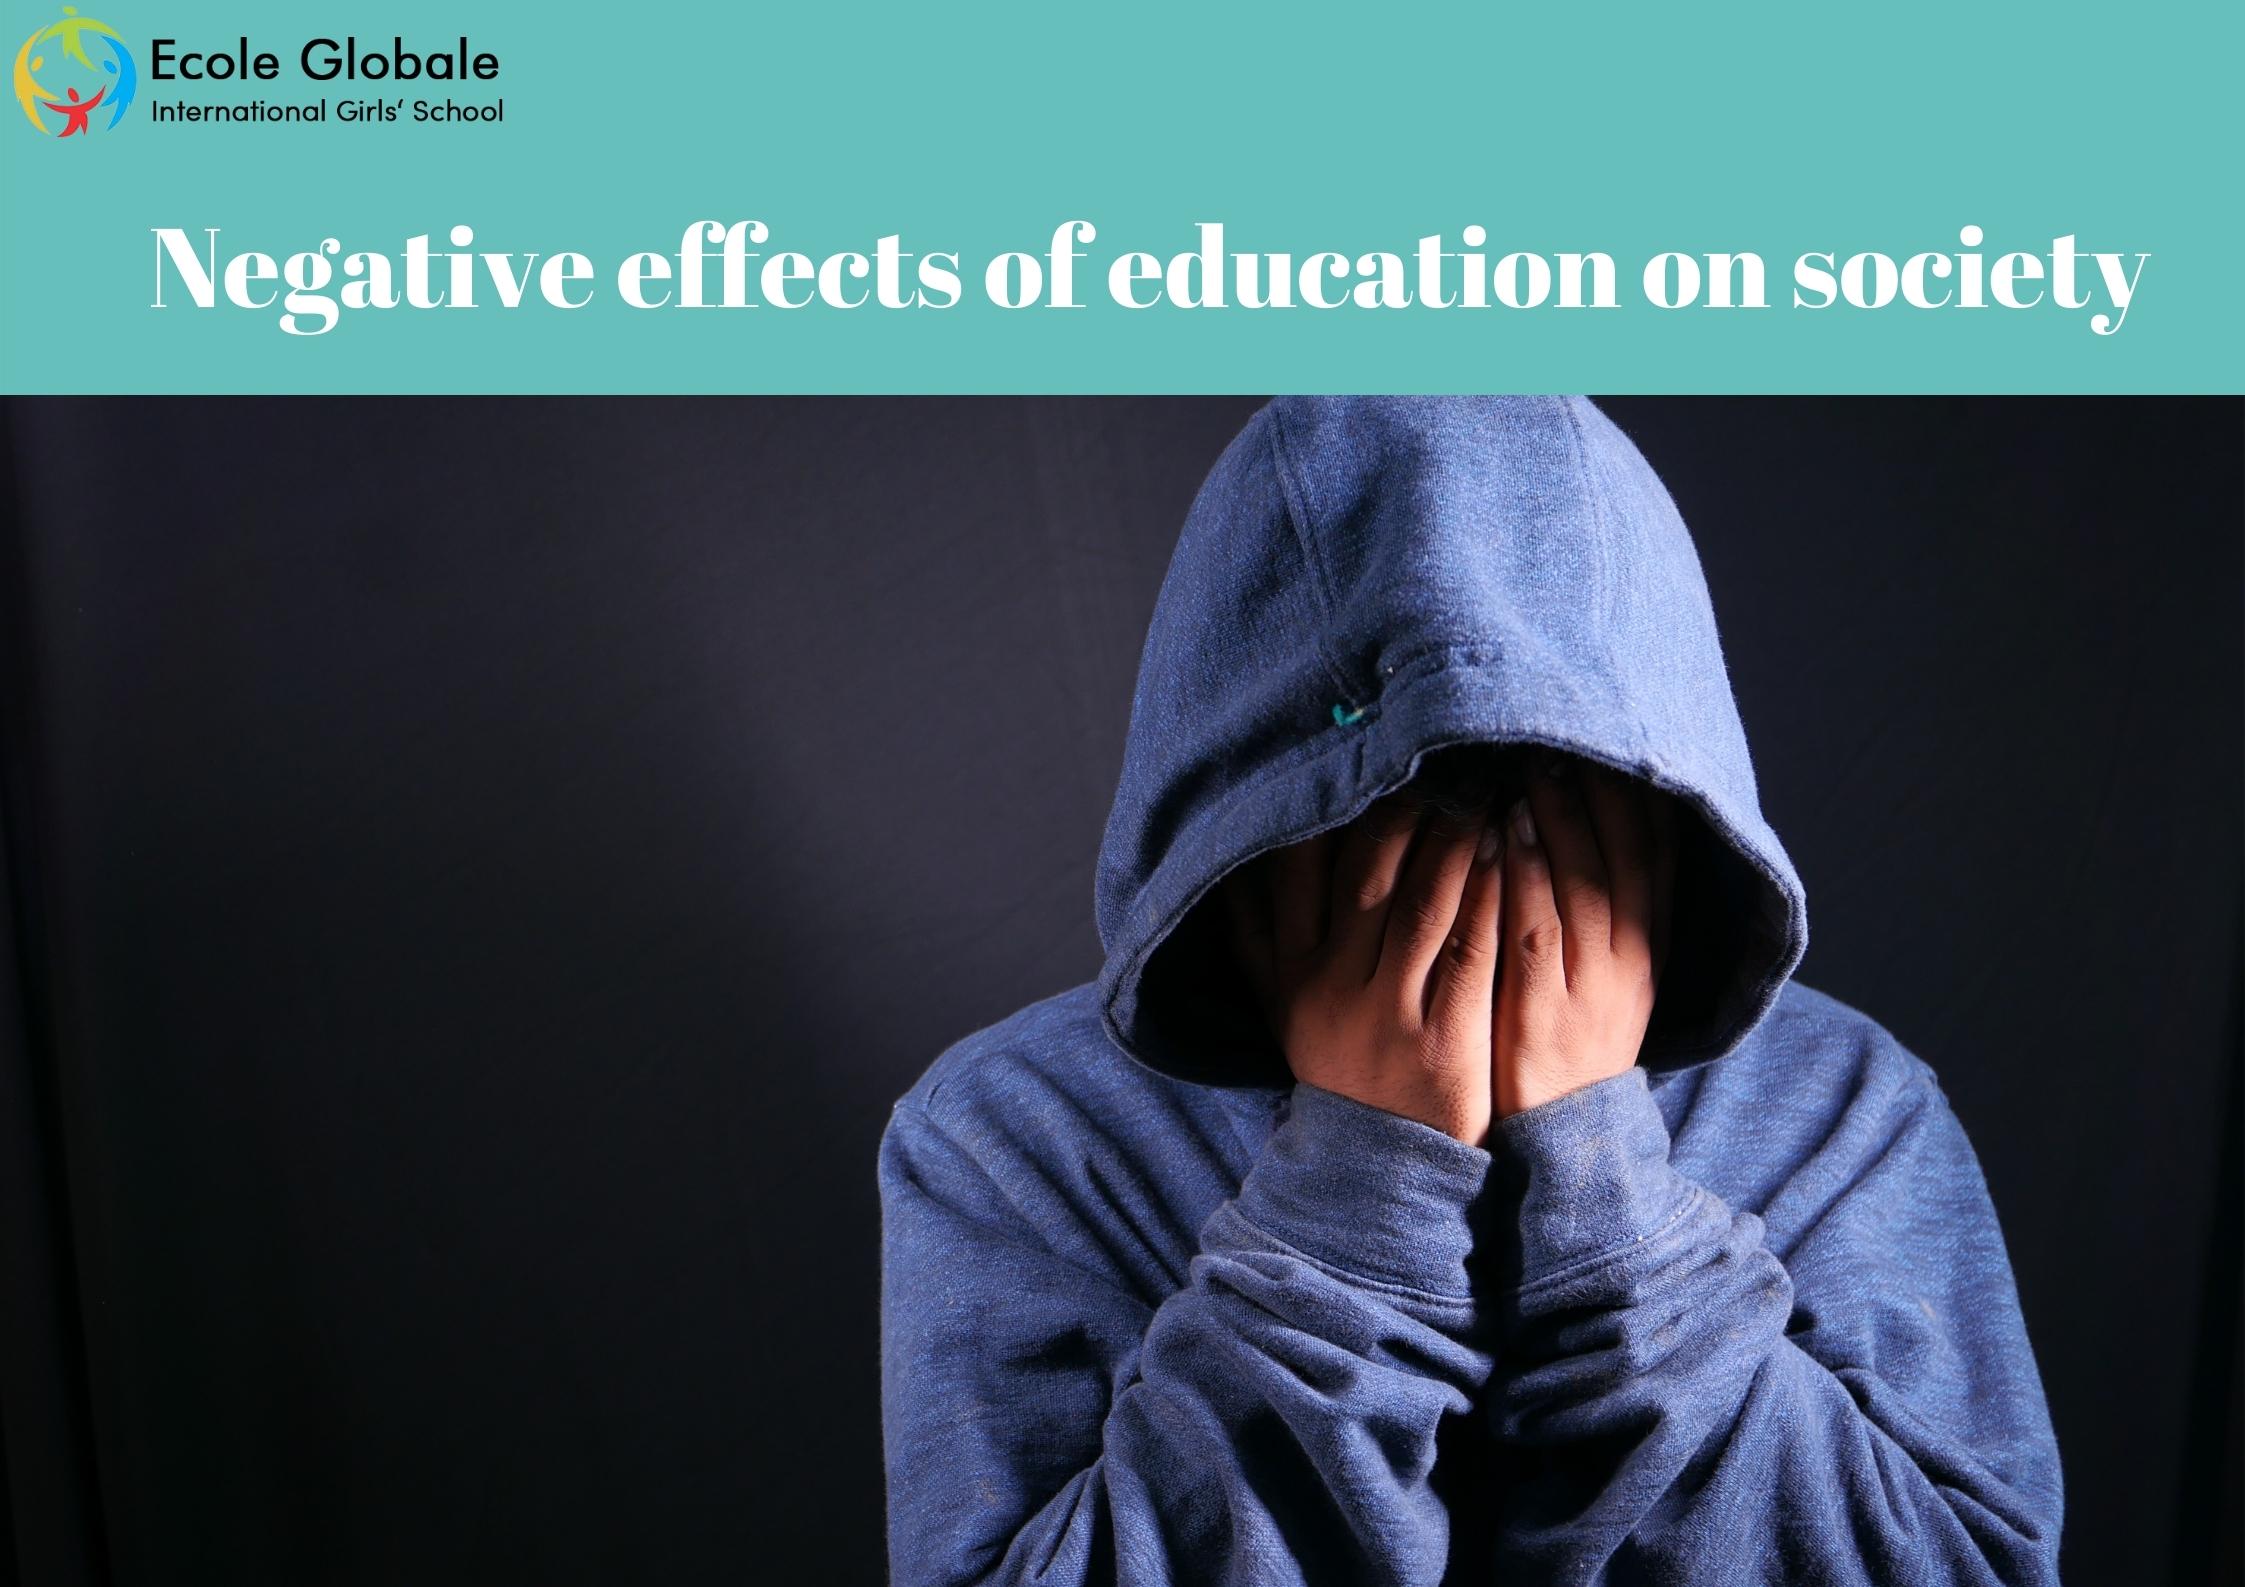 What are the negative effects of education on society?